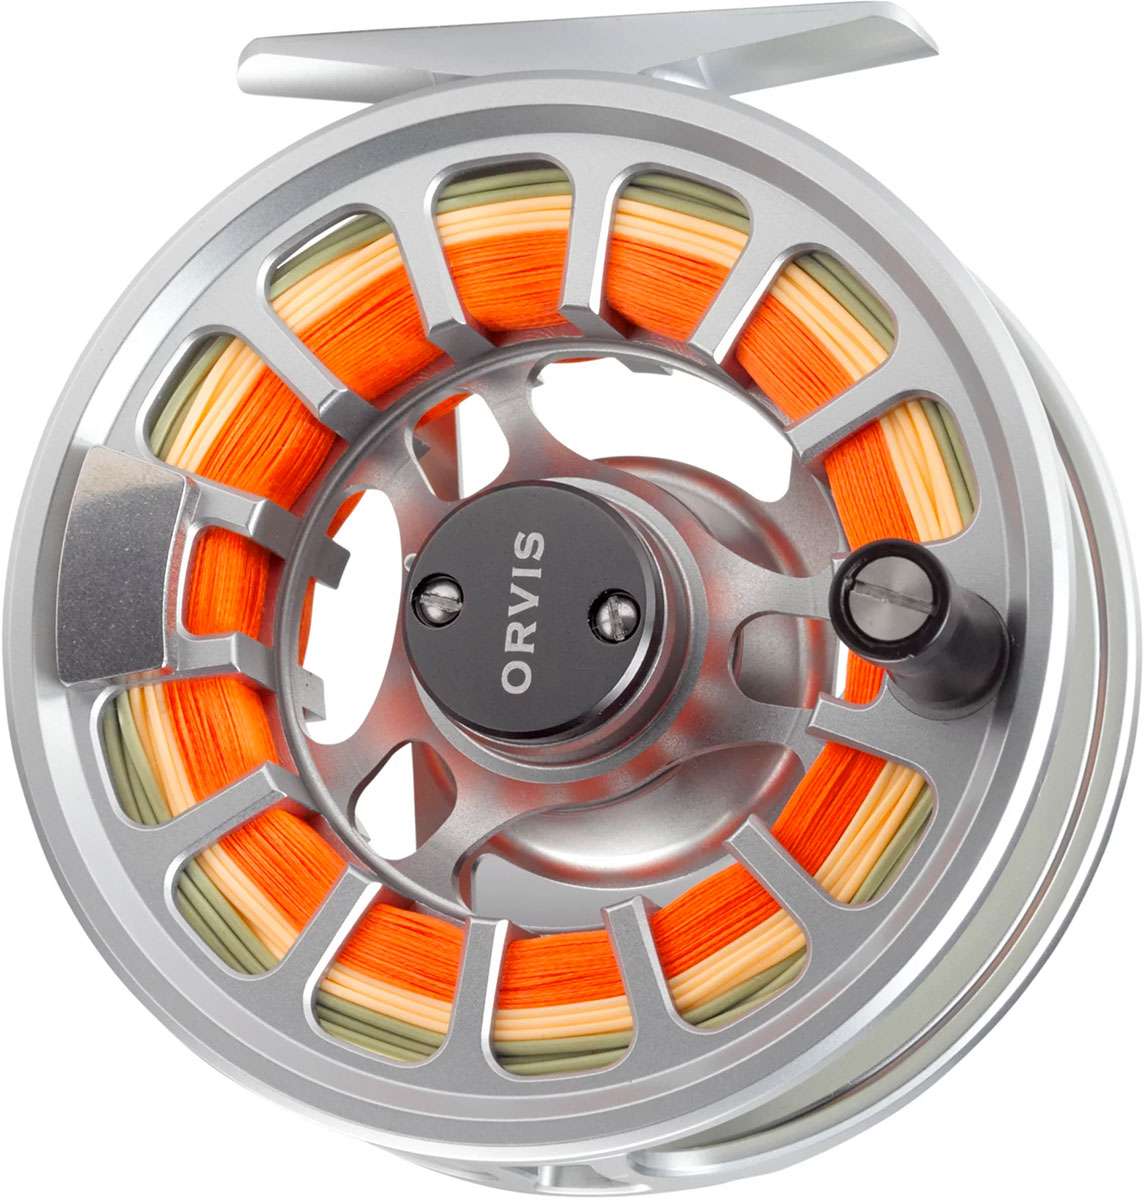 https://i.tackledirect.com/images/inset1/orvis-hydros-fly-reel-iv-silver.jpg